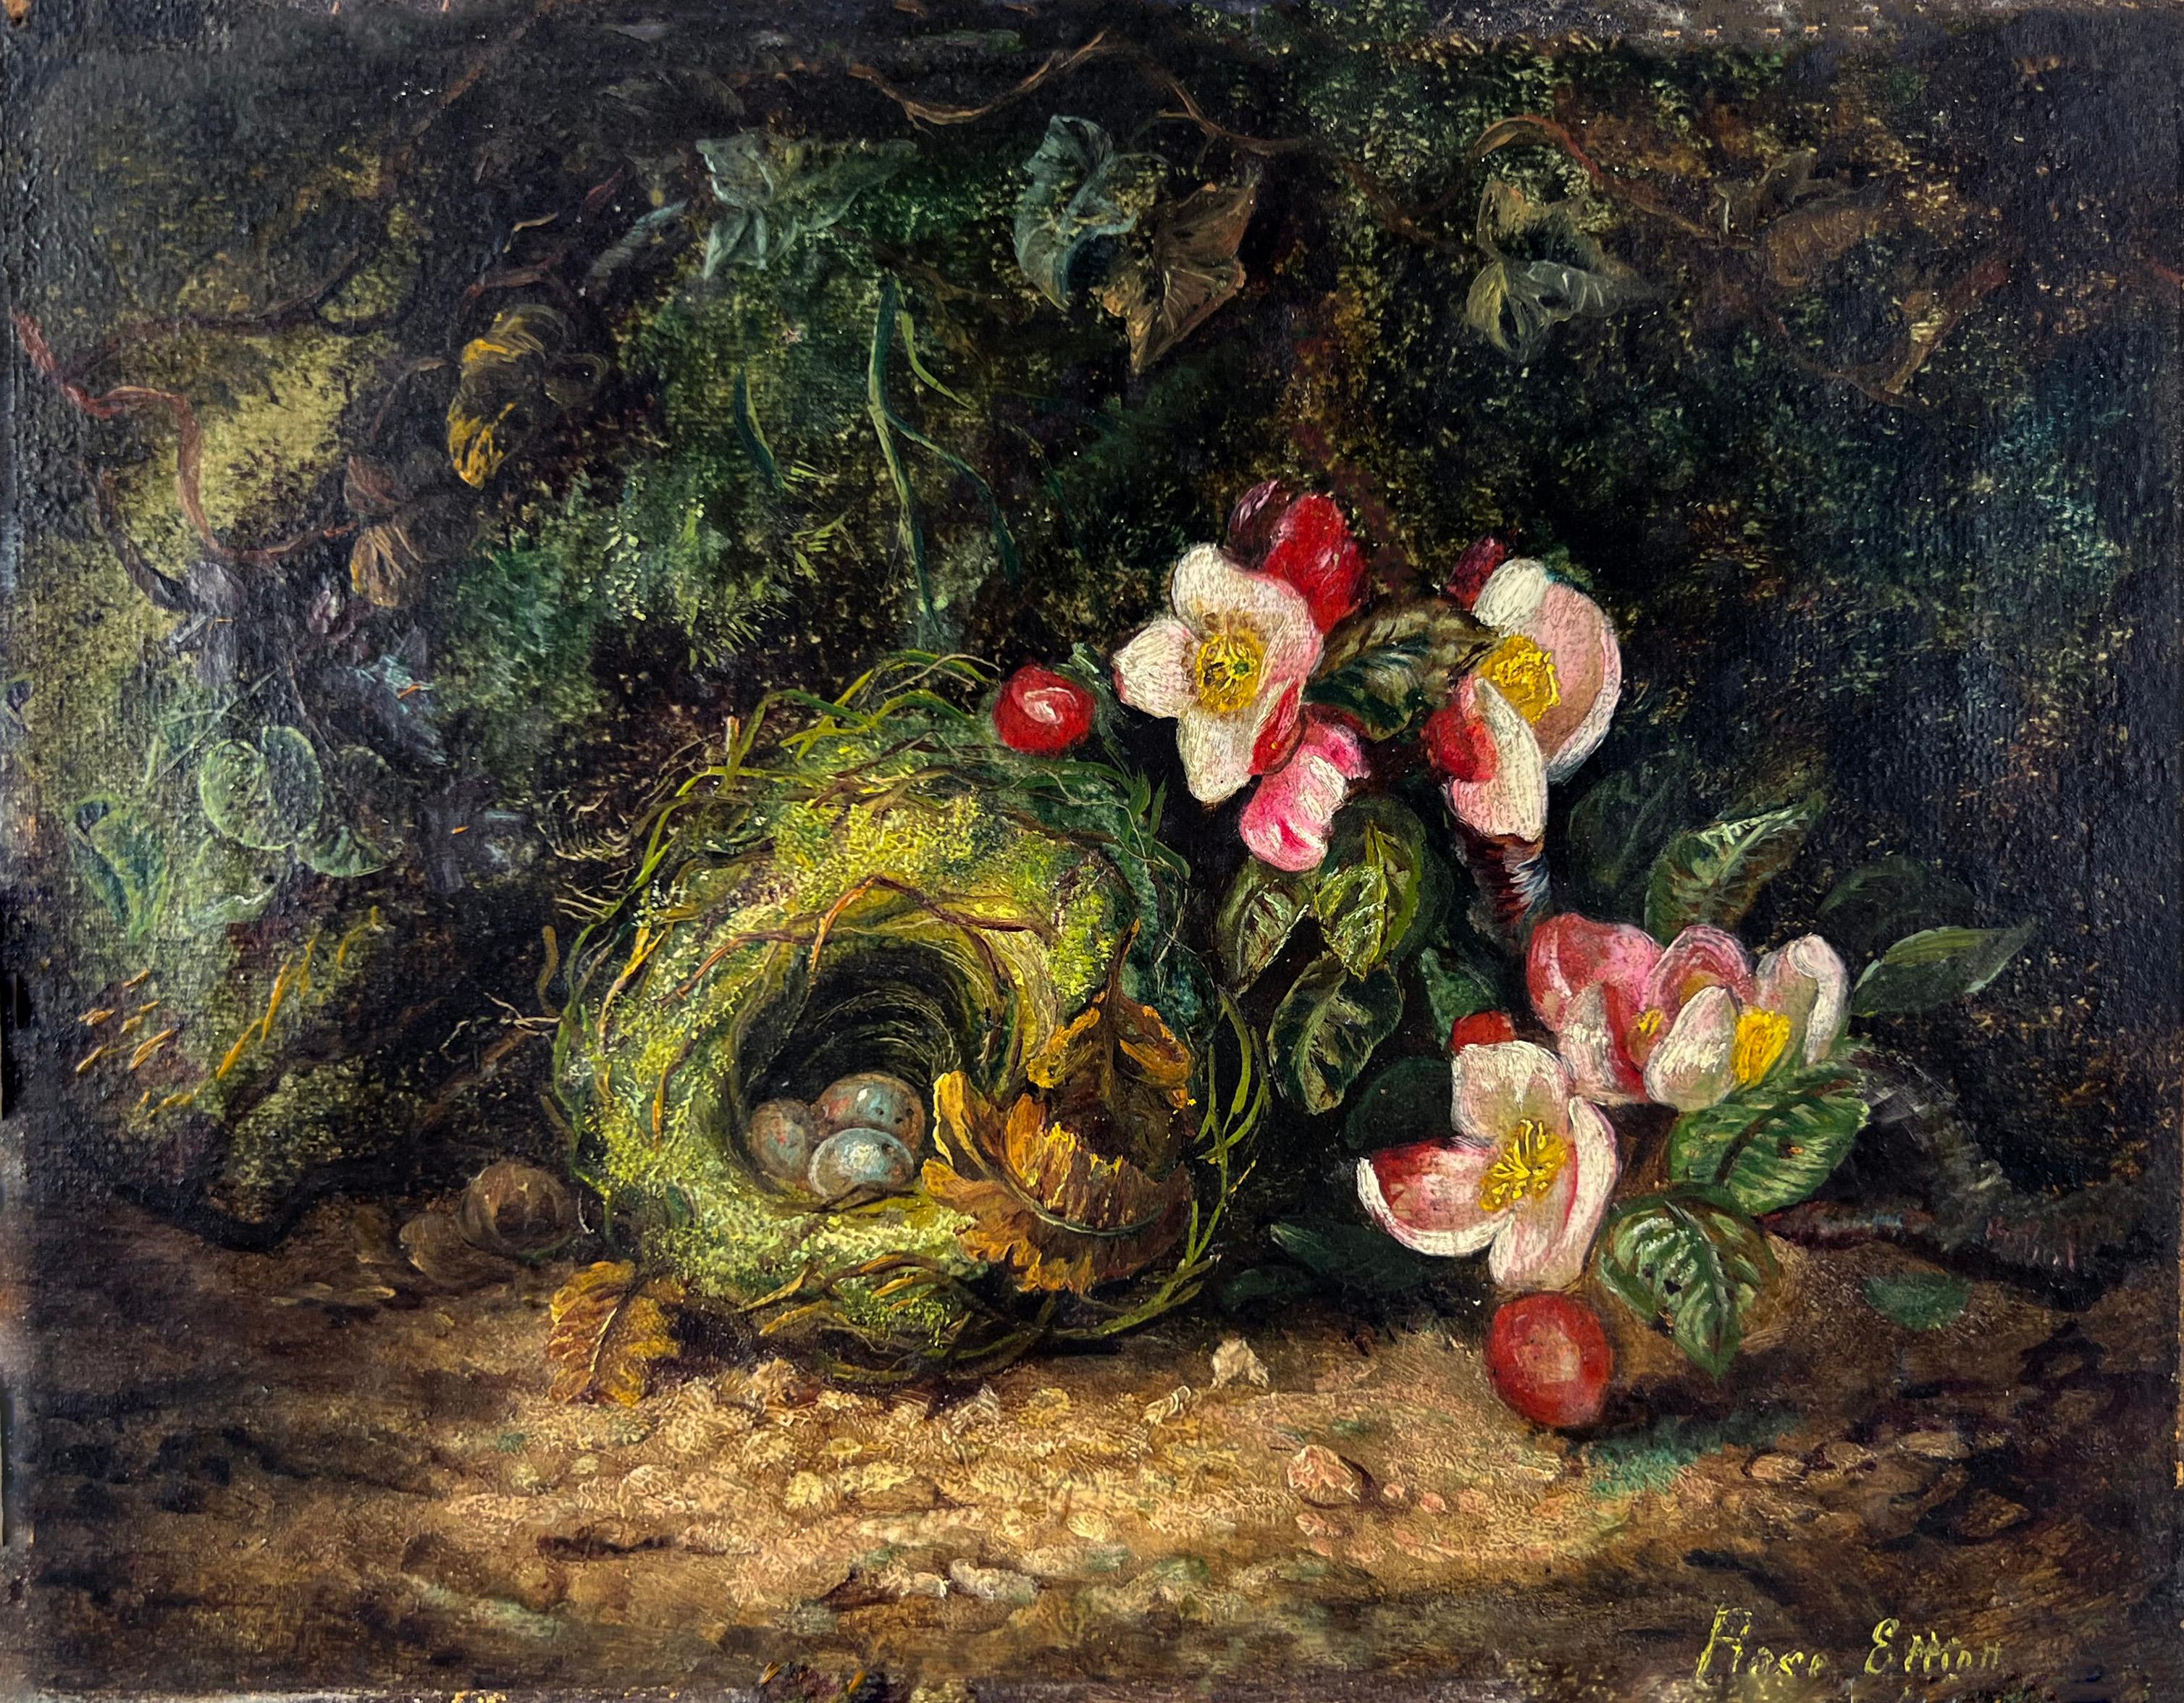 Birds Nest and Apple Blossoms Oil on Linen Gump's S.F. Store 1900 by Rose Elliot
Very well executed oil painting on linen after a painting by Oliver Clare (1893) by San Francisco painter Rose Elliot (American, 19th/20th C). Detailed boughs and